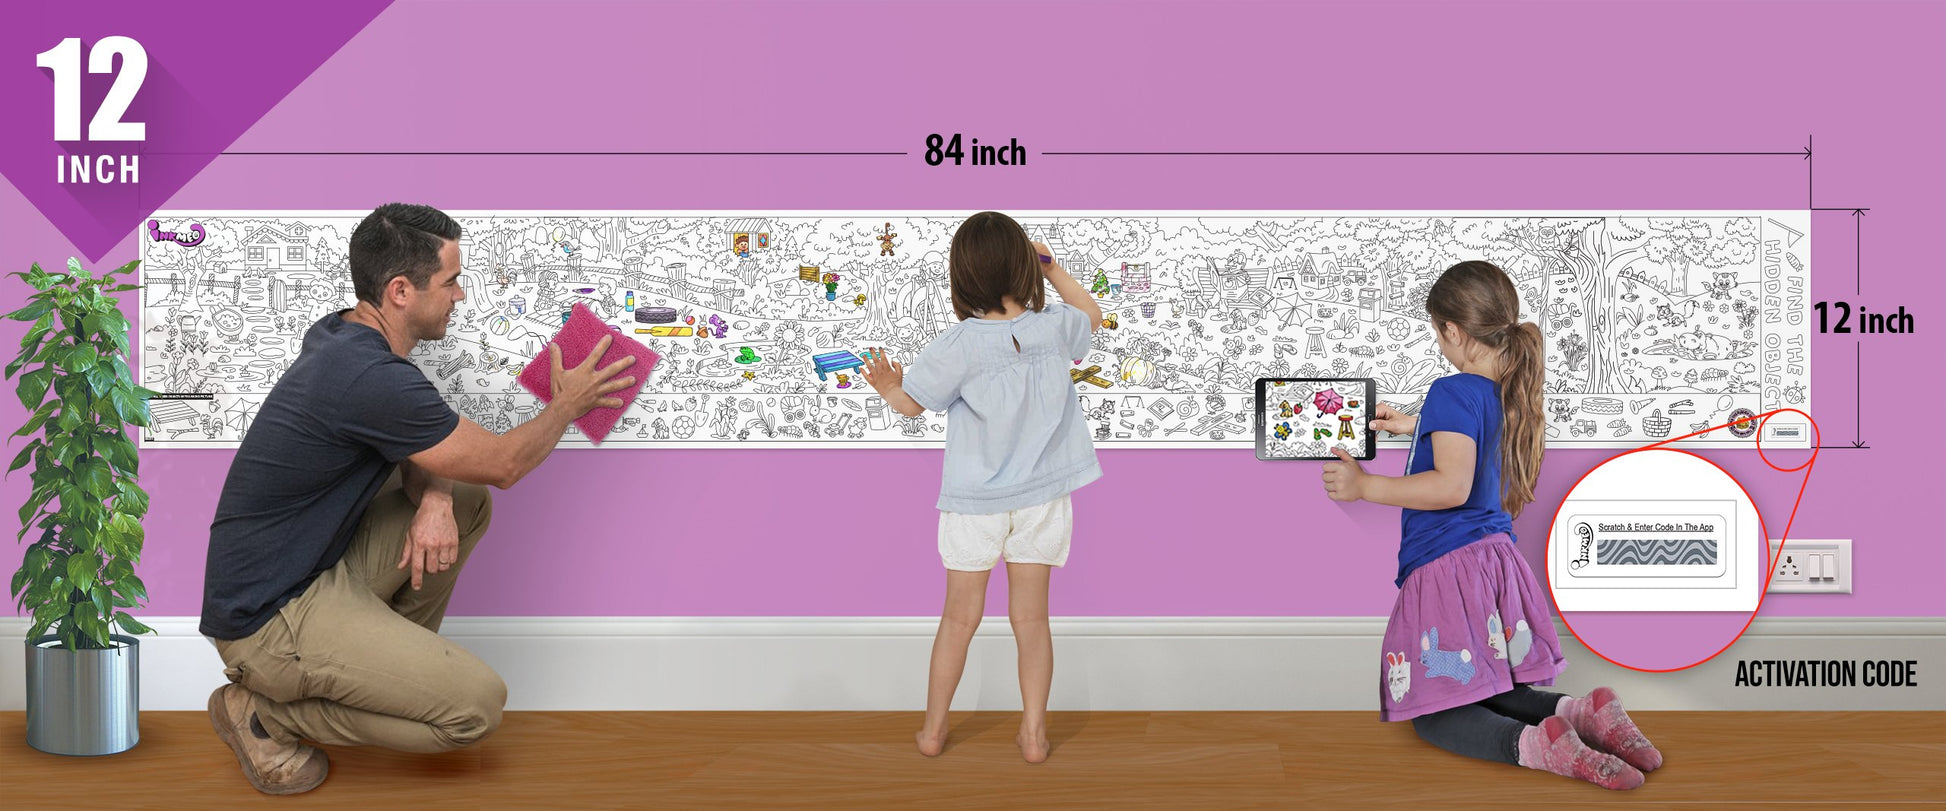 The image depicts a father and his two daughters enjoying a bonding moment while colouring find the hidden objects sheet attached to the wall.